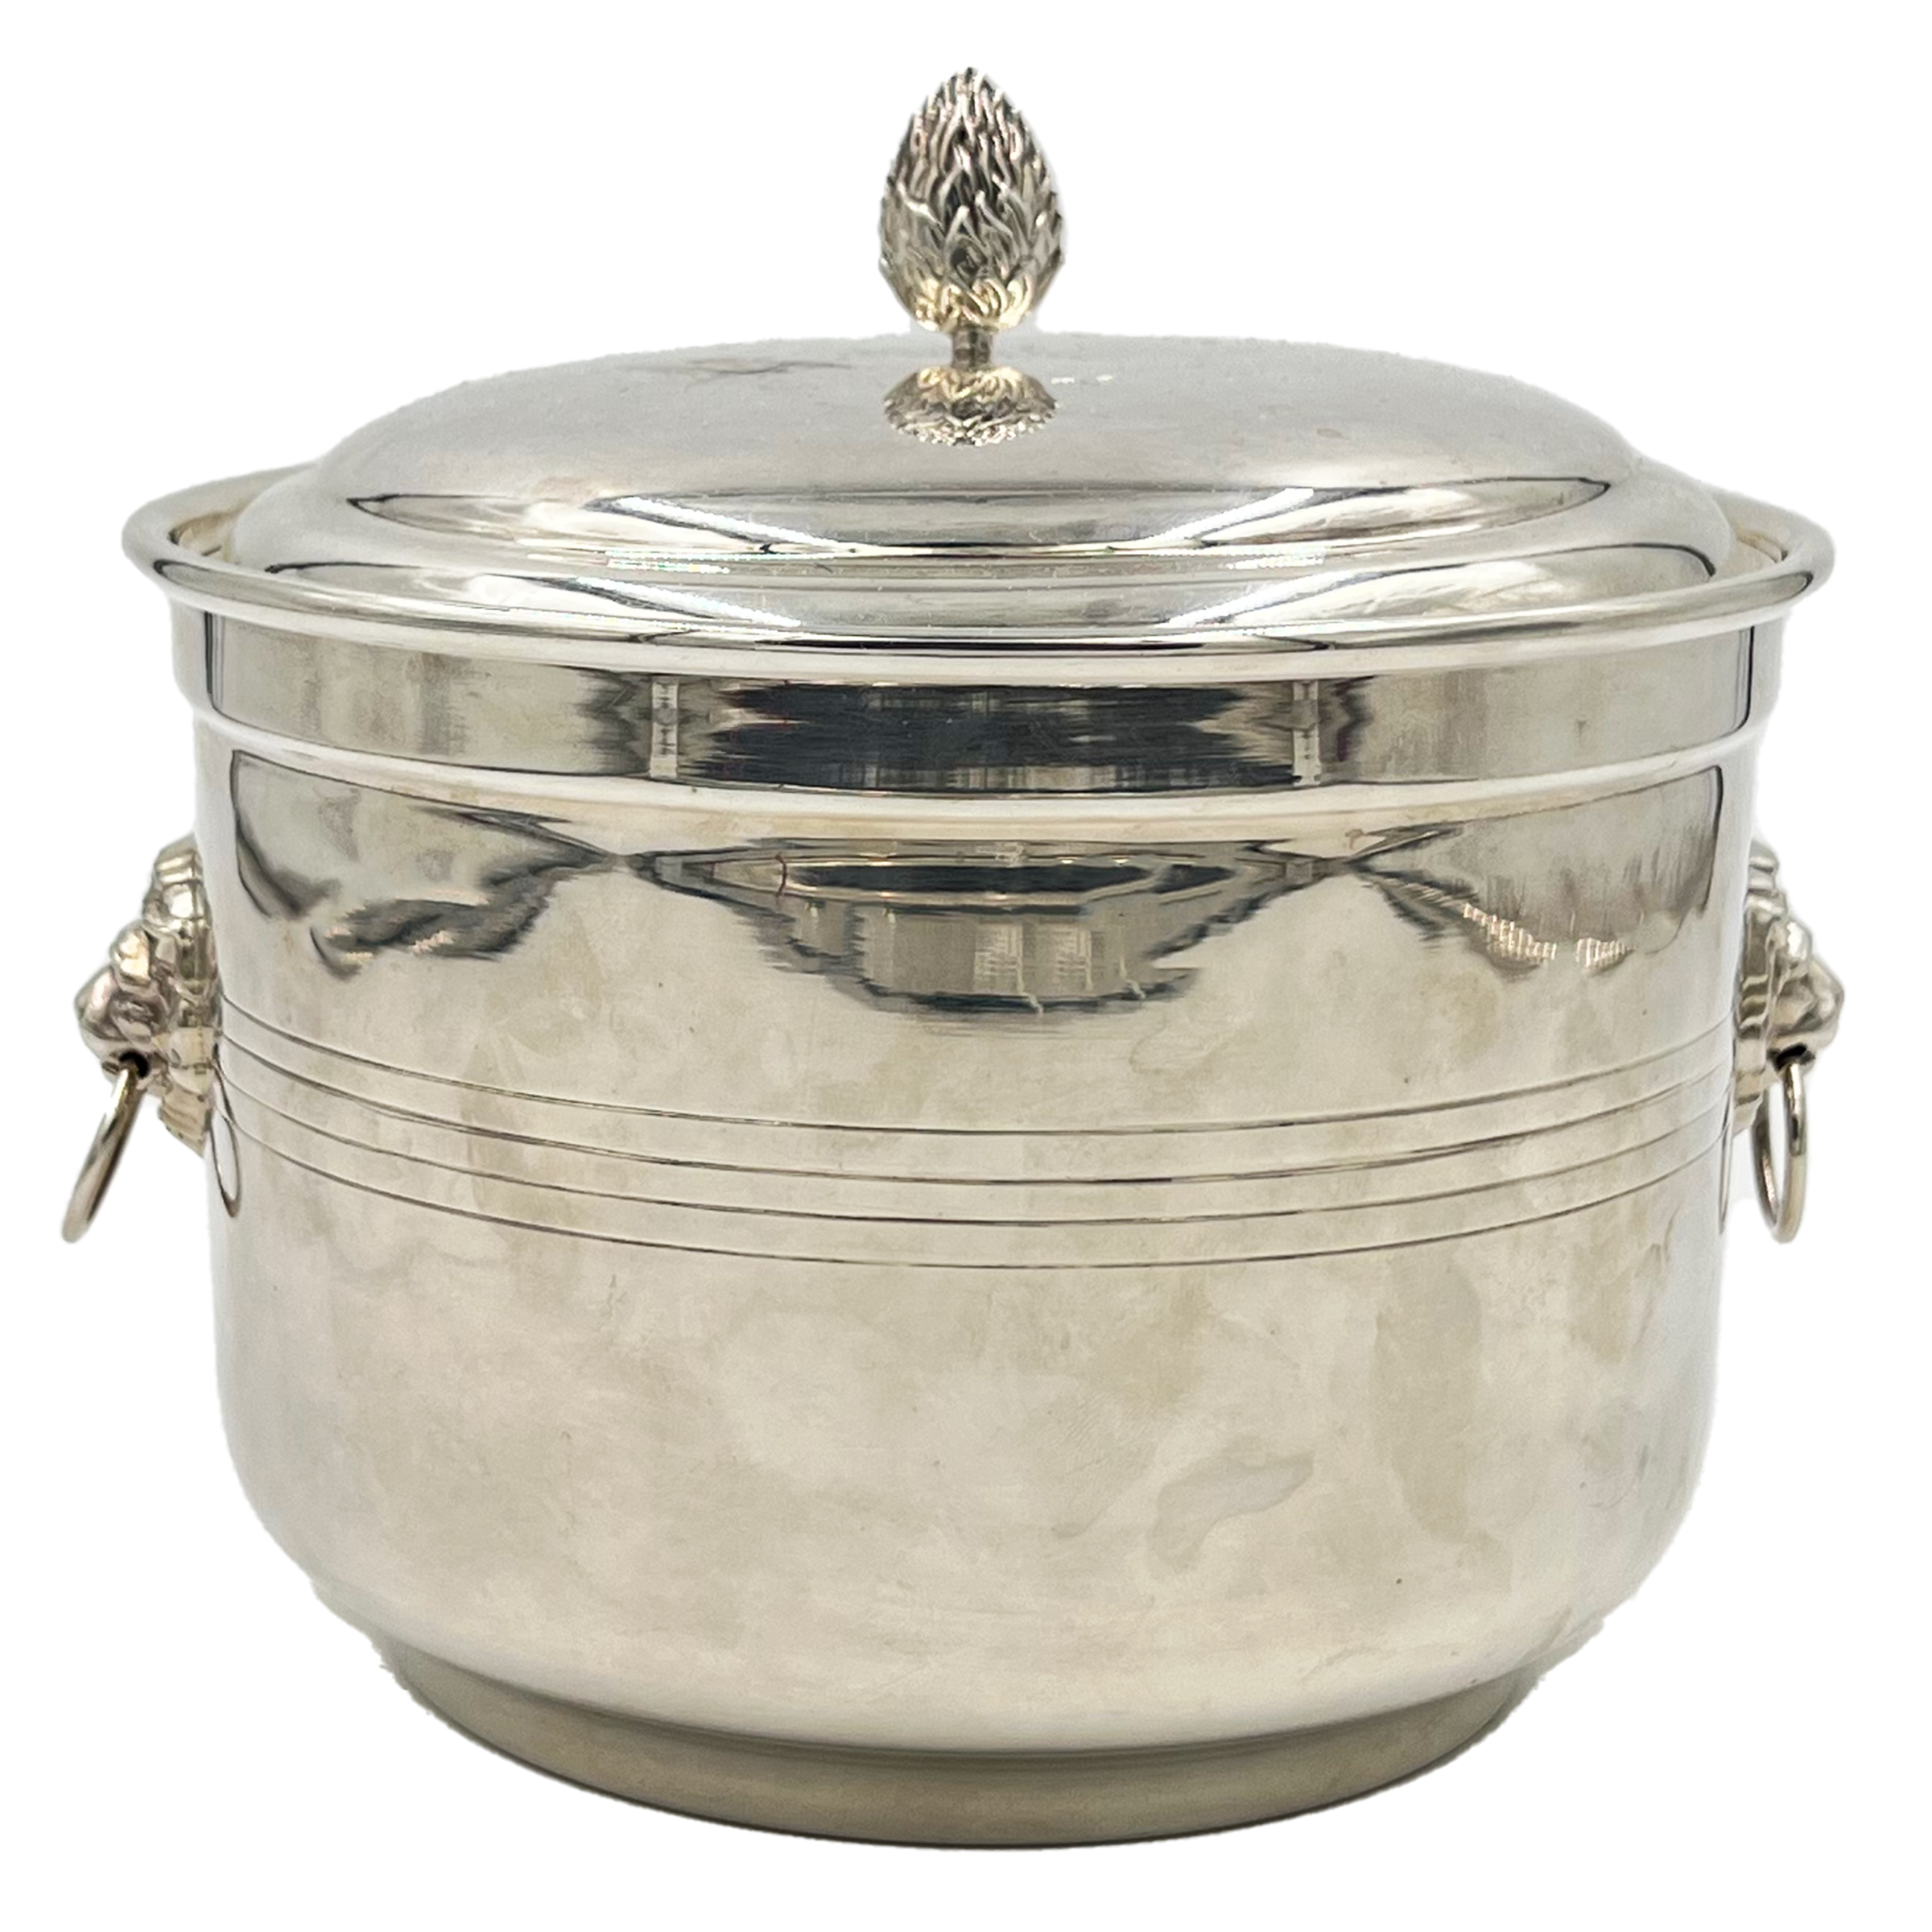 A LARGE SILVER LIDDED ICE BUCKET CONTAINER WITH A BUD FINIAL ON THE LID, BIRMINGHAM, 1988